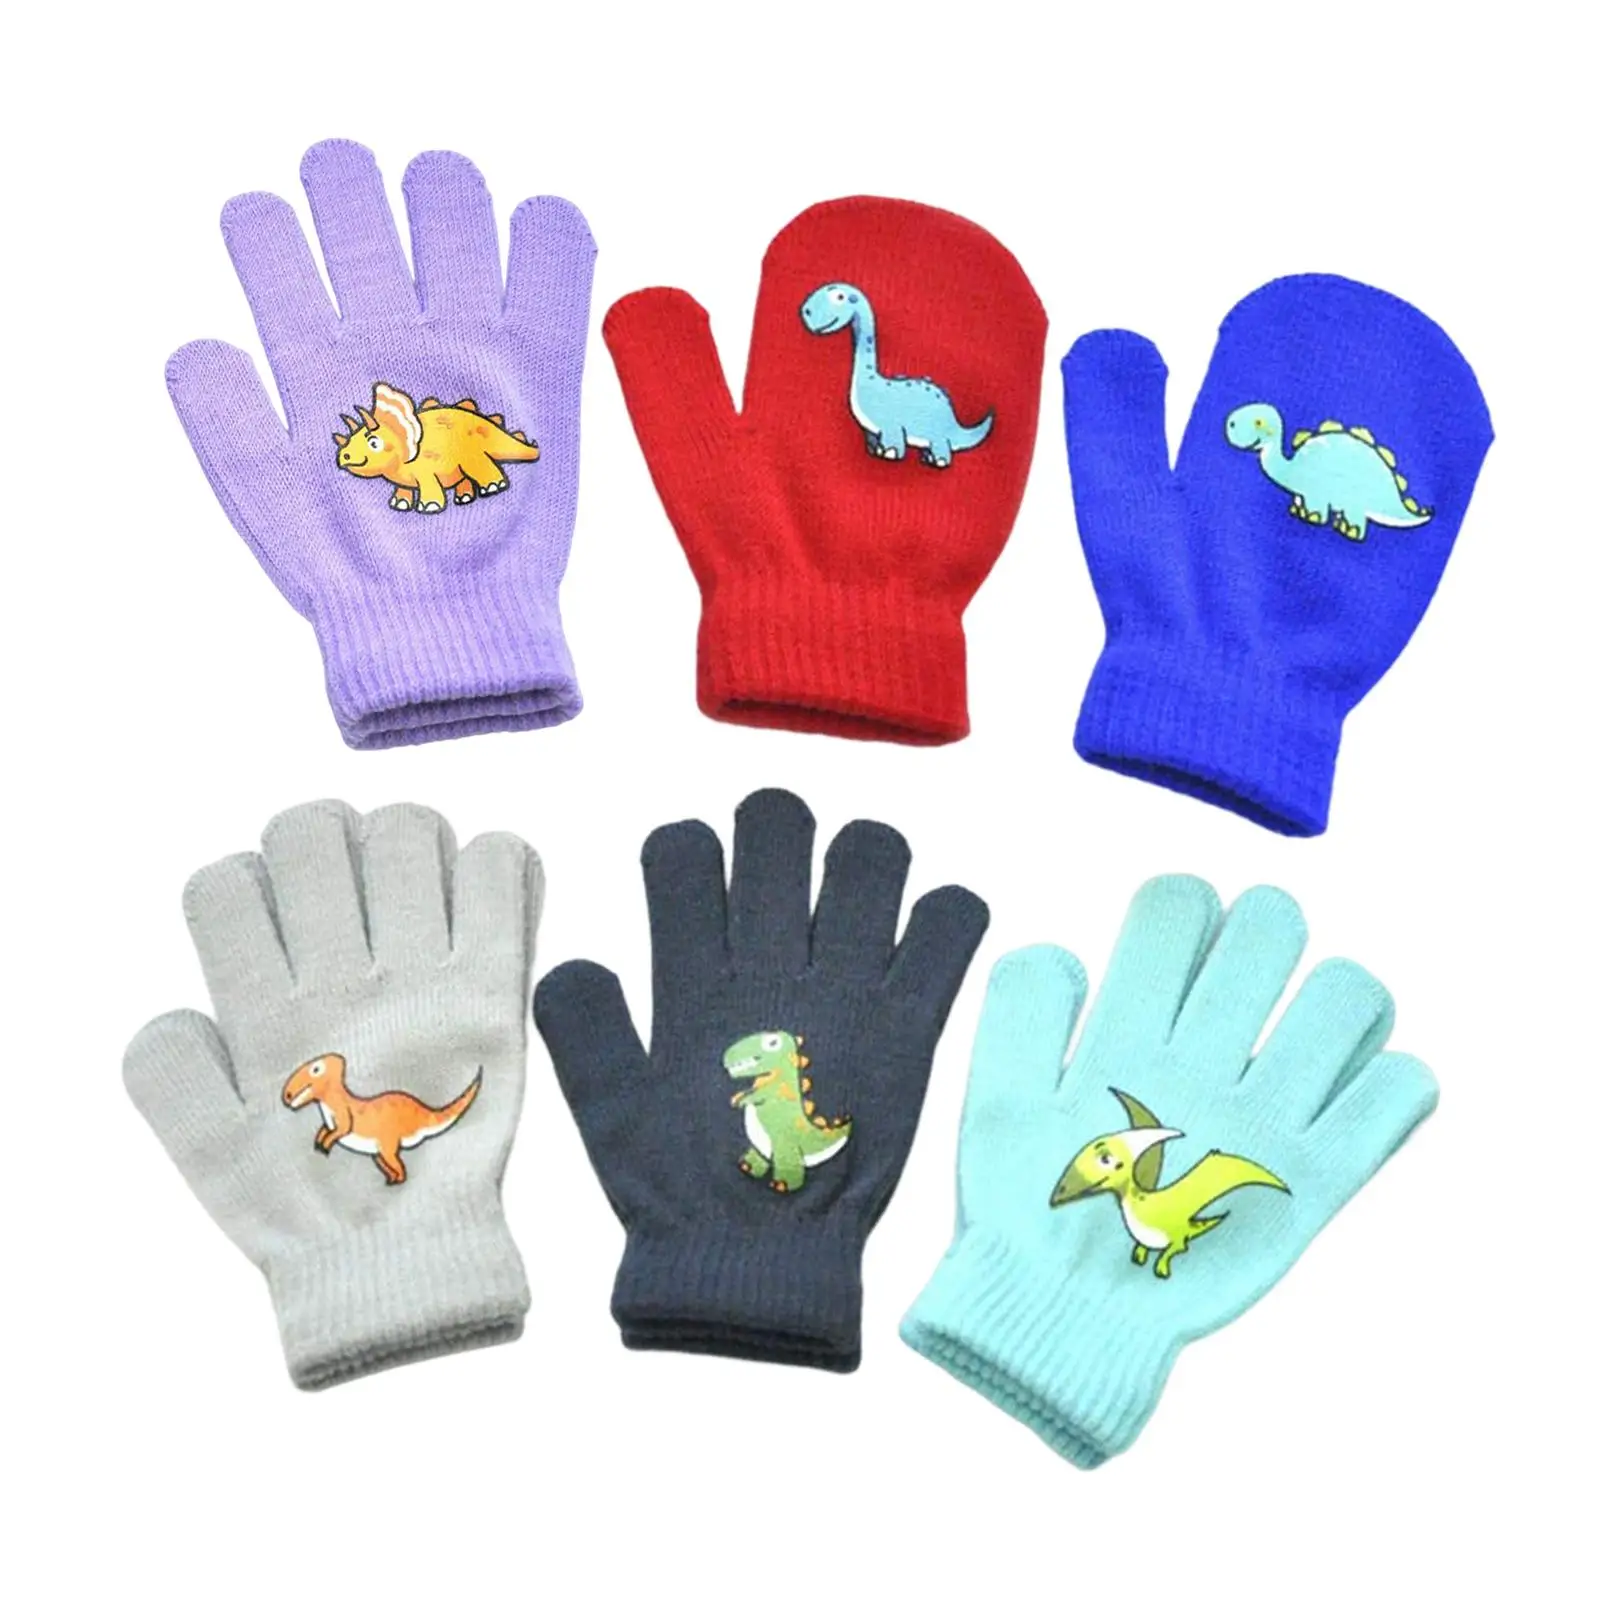 12x Kids Gloves Winter Outdoor Sports Cycling Unisex Warm Knitted Gloves